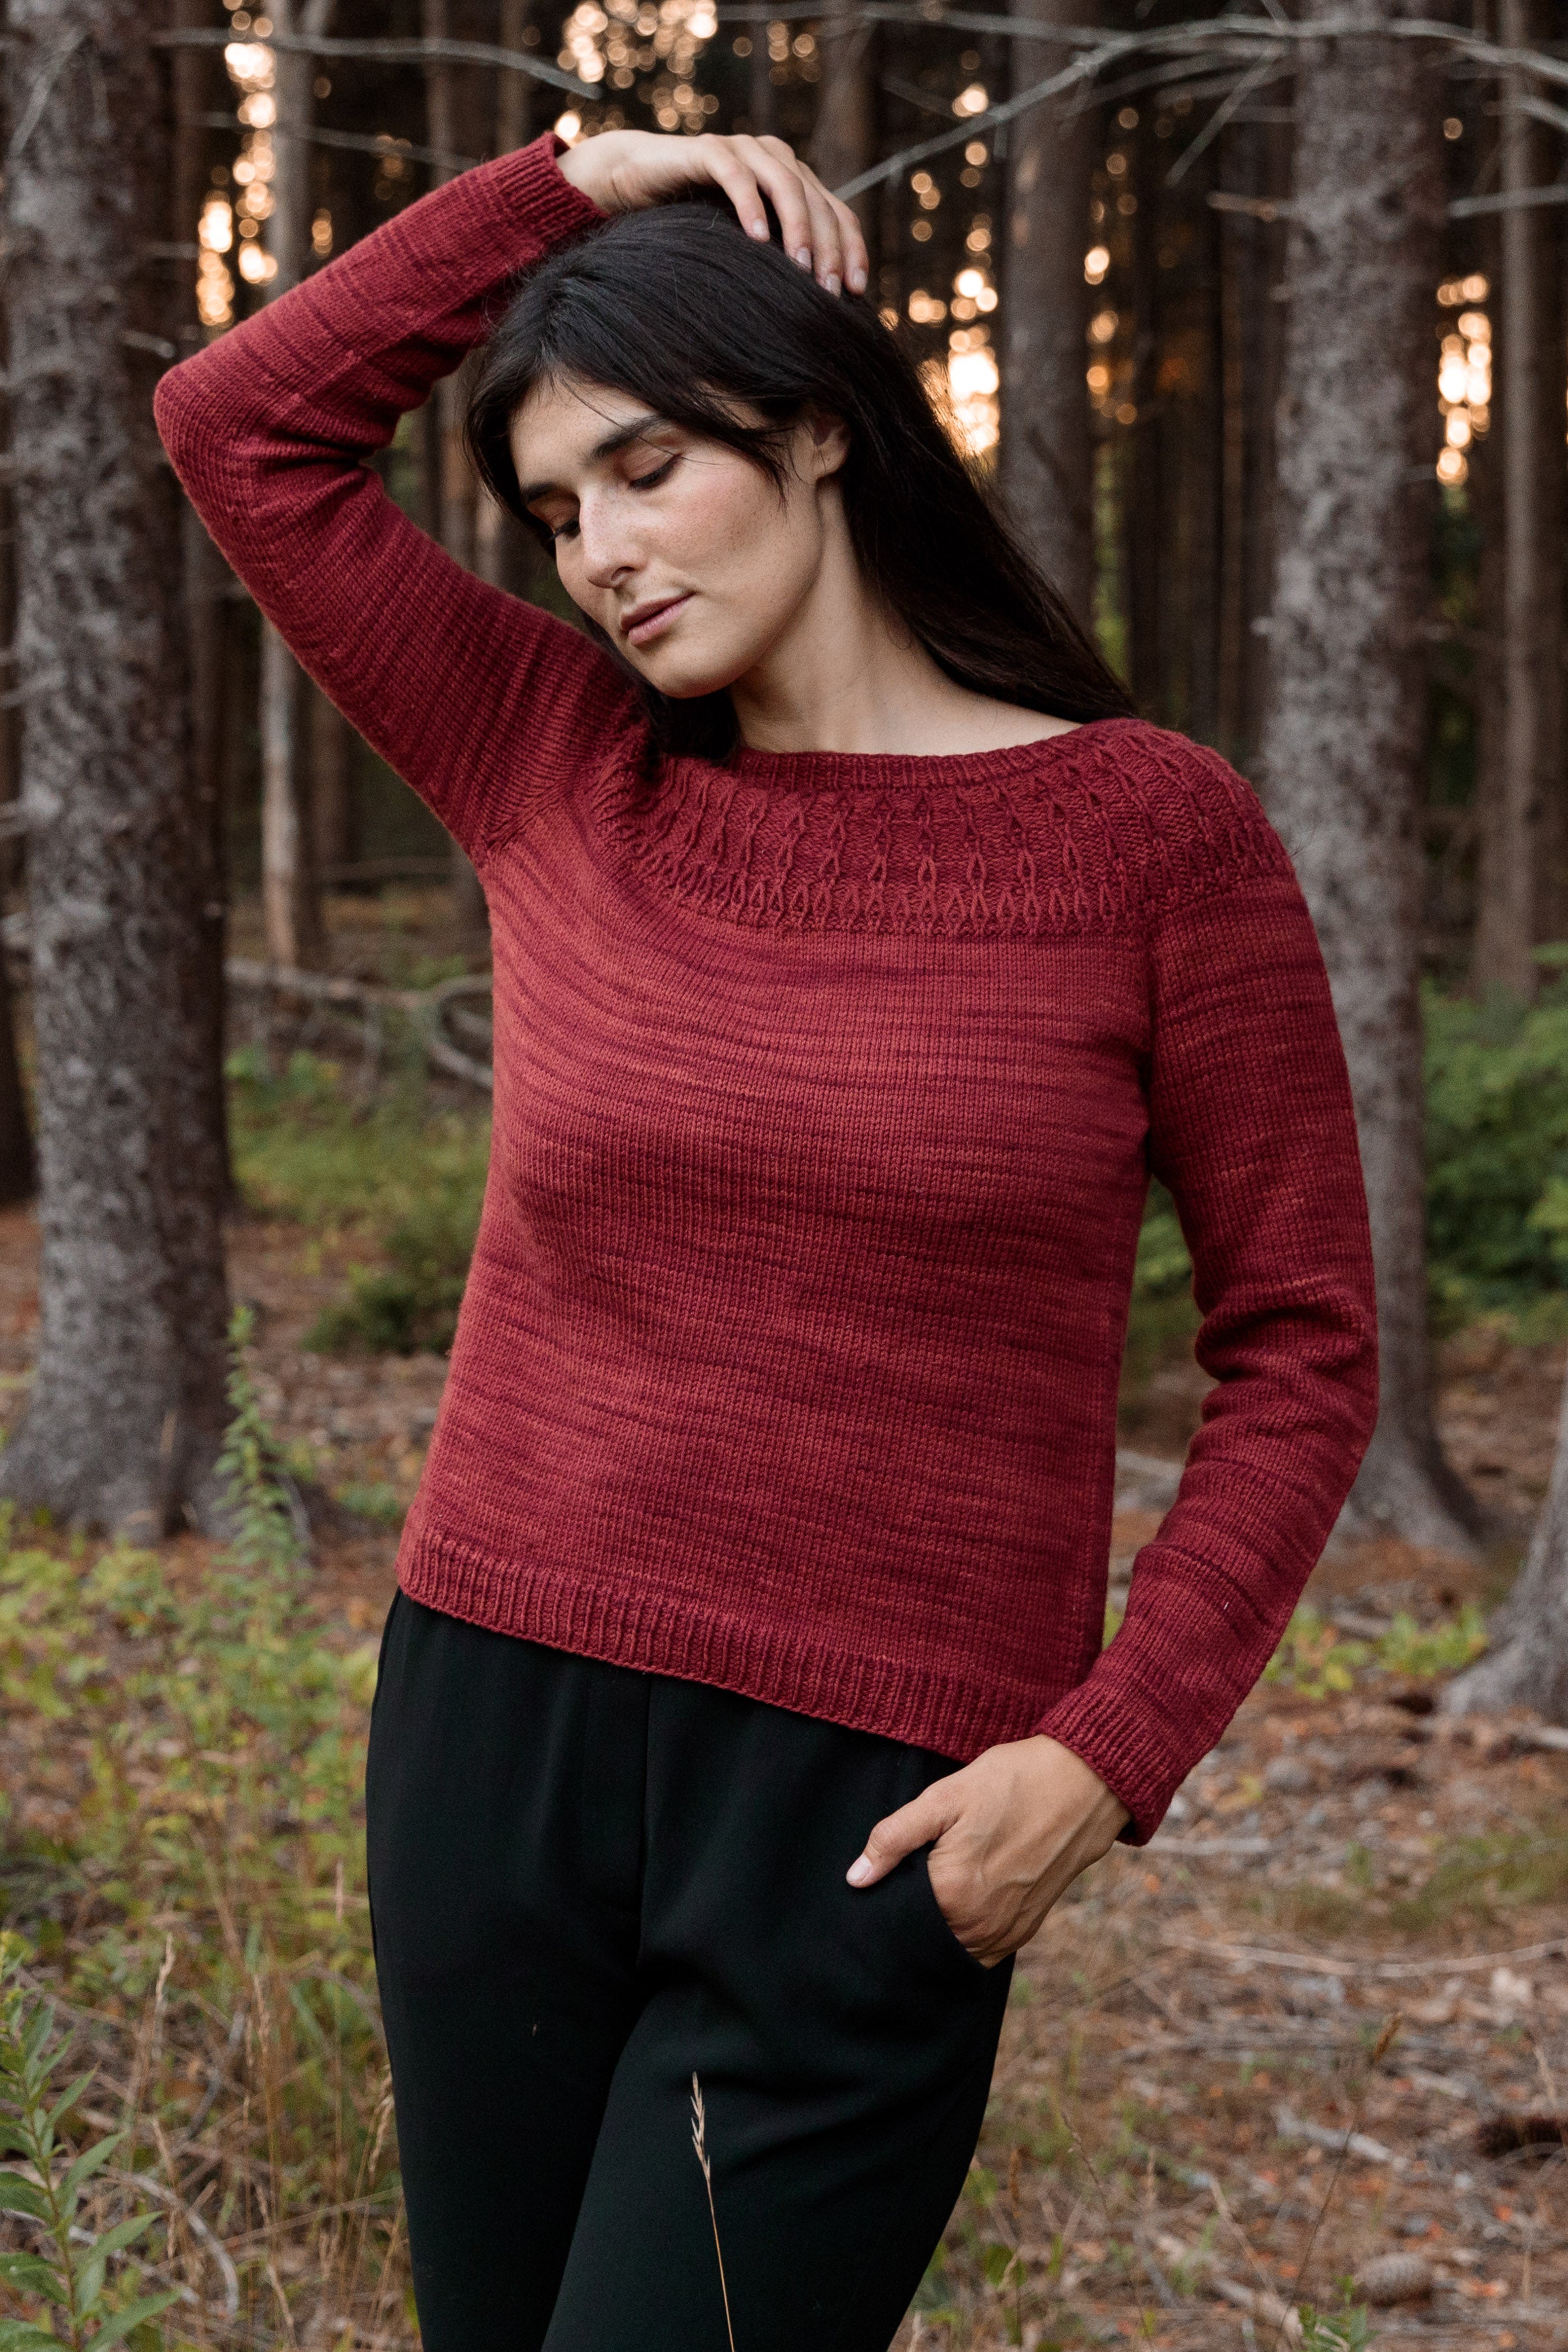 lamella pullover sweater knitting pattern – Quince & Co.